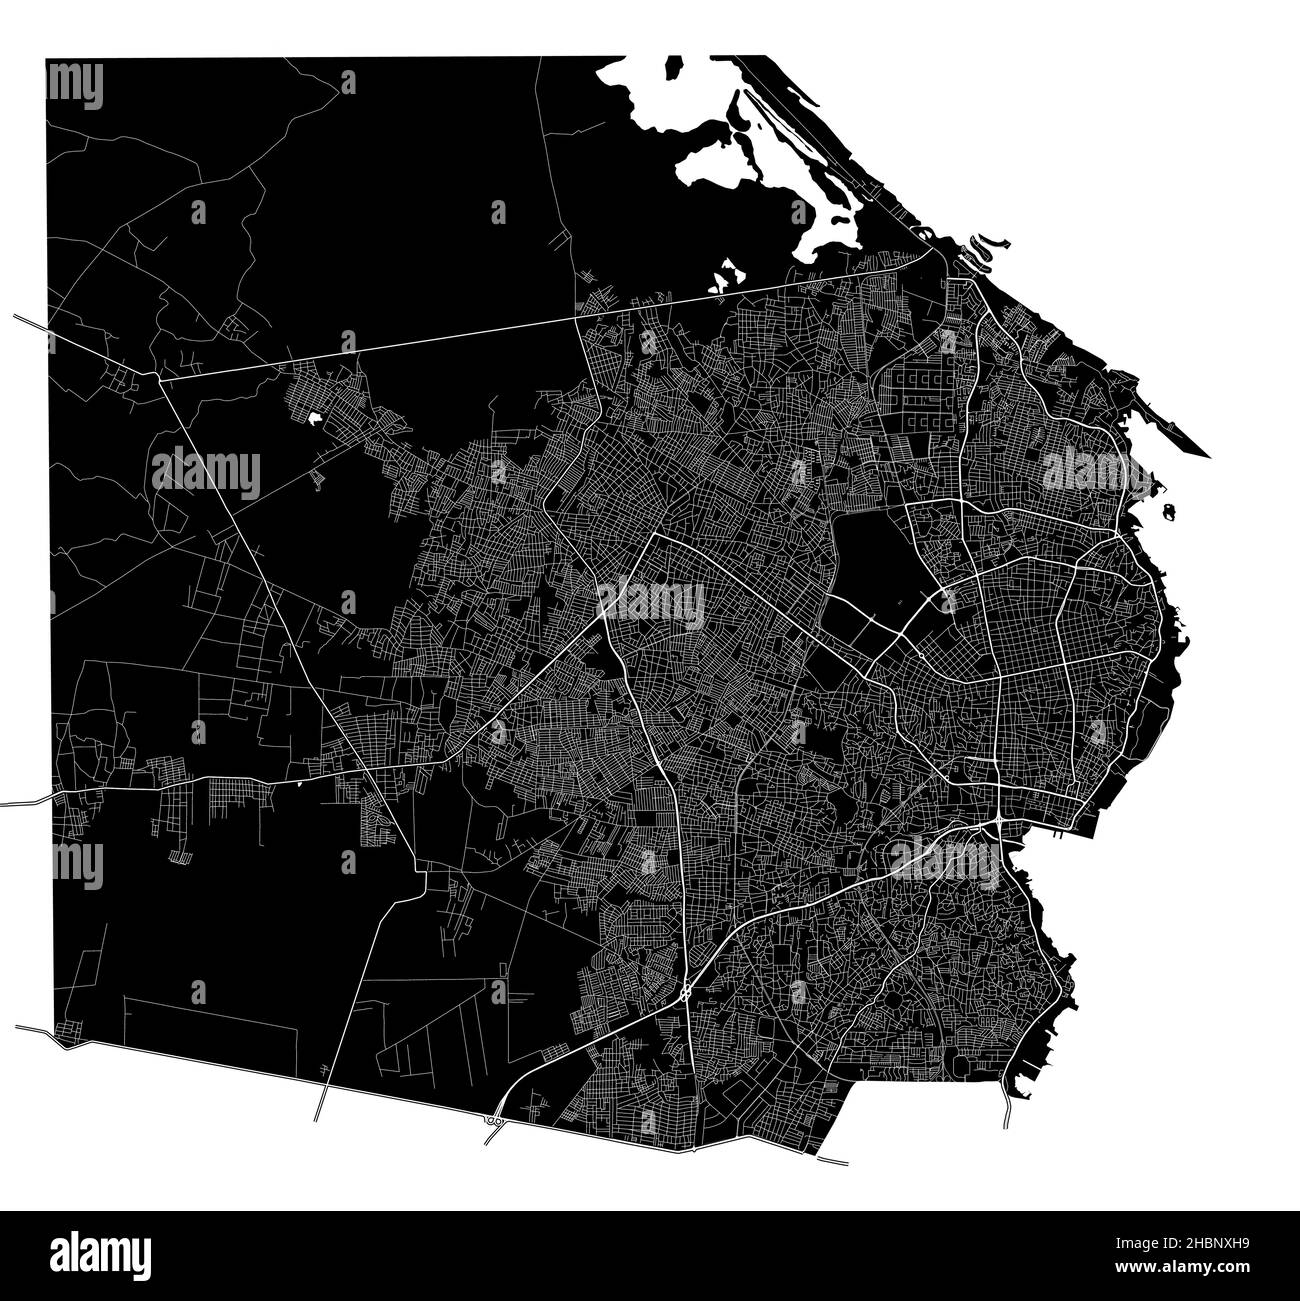 Maracaibo, Venezuela, high resolution vector map with city boundaries, and editable paths. The city map was drawn with white areas and lines for main Stock Vector